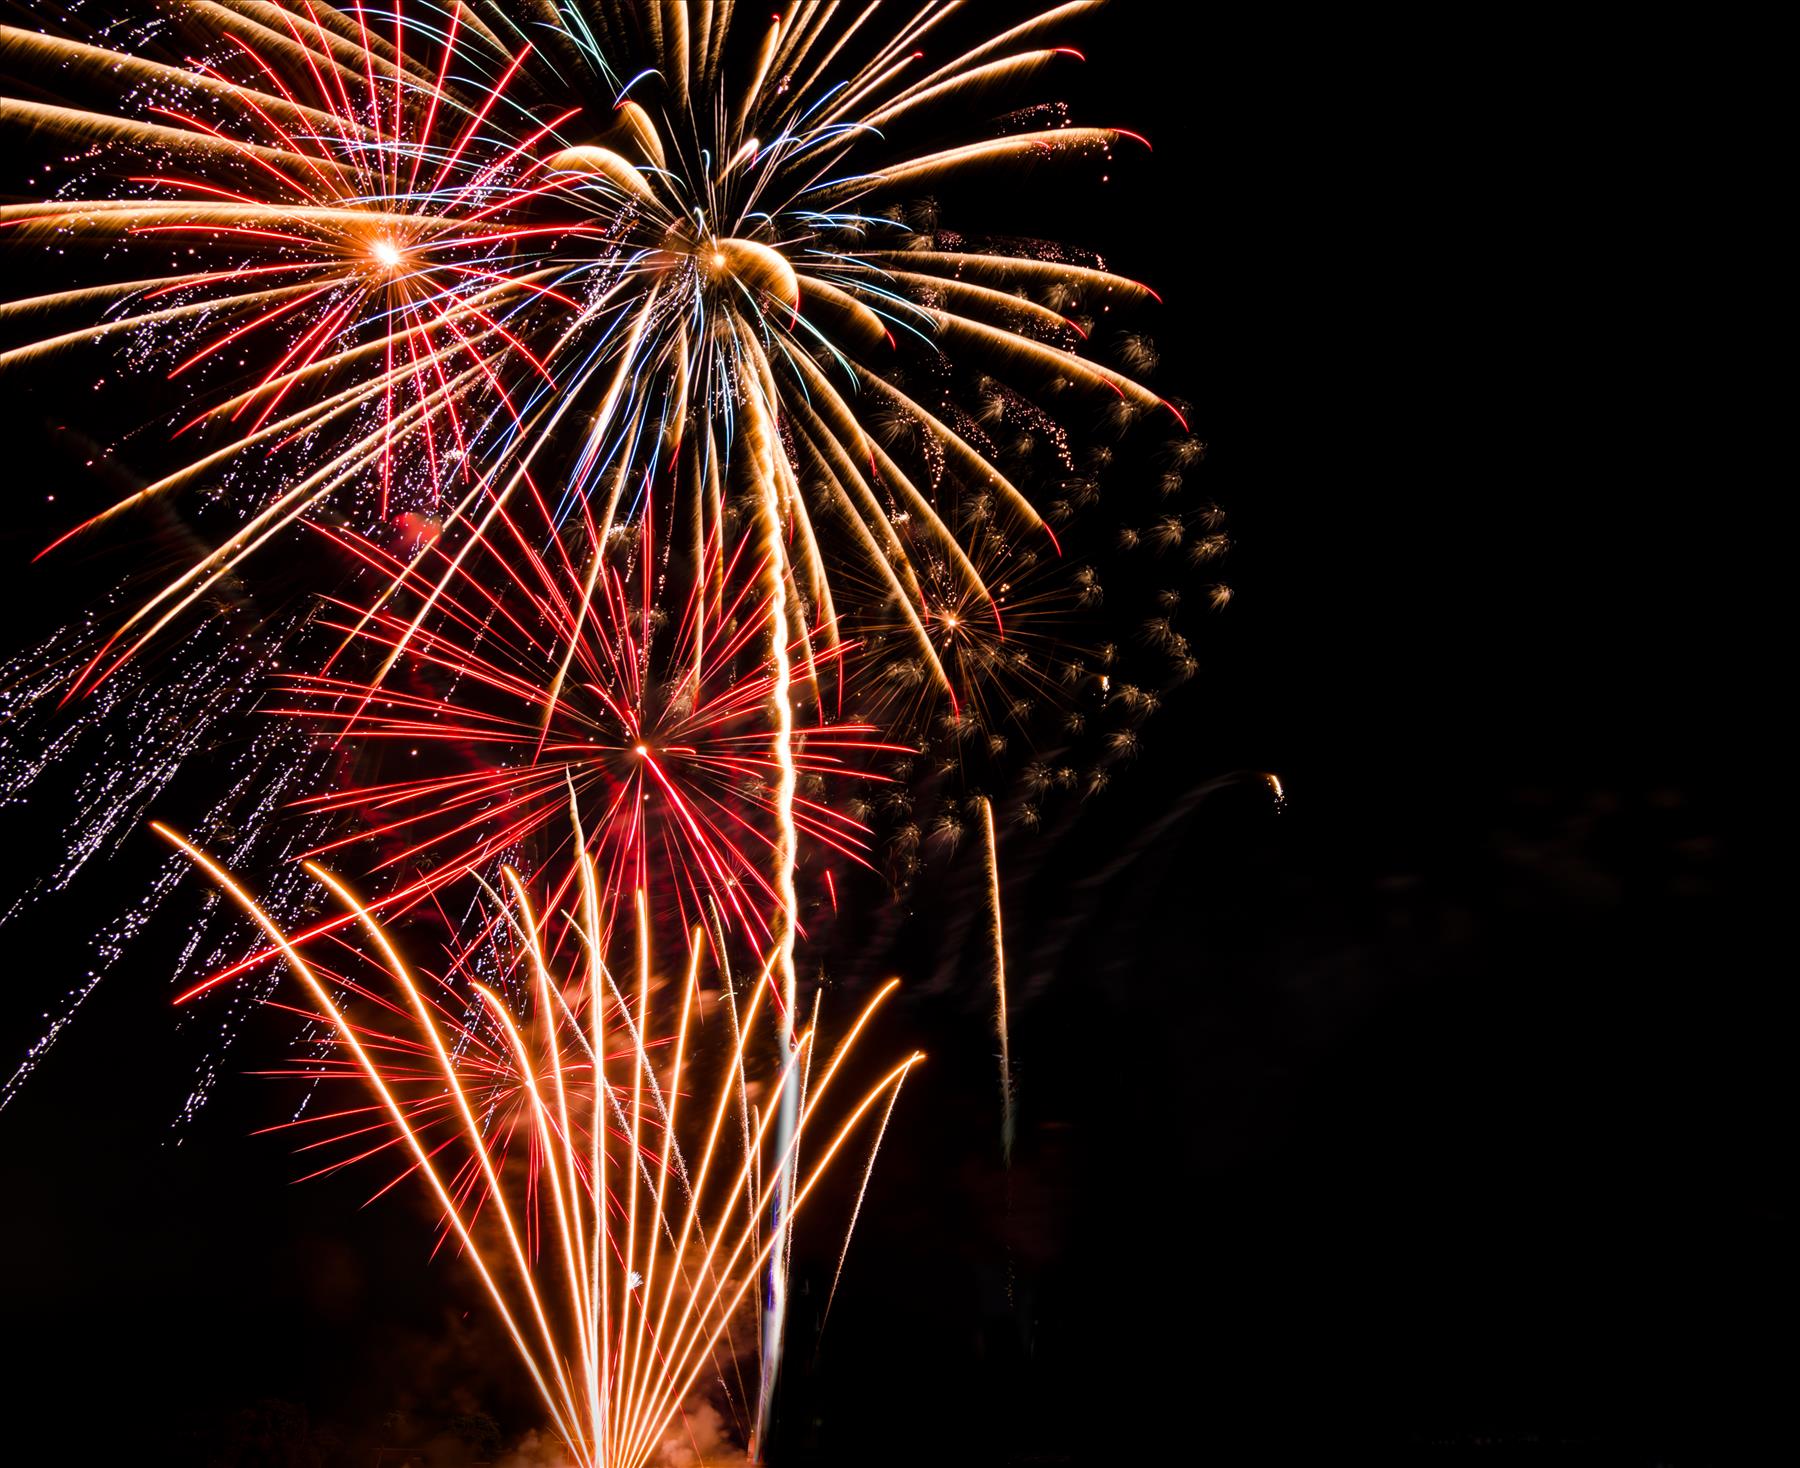 Safety Tips to Prevent Fireworks Injuries